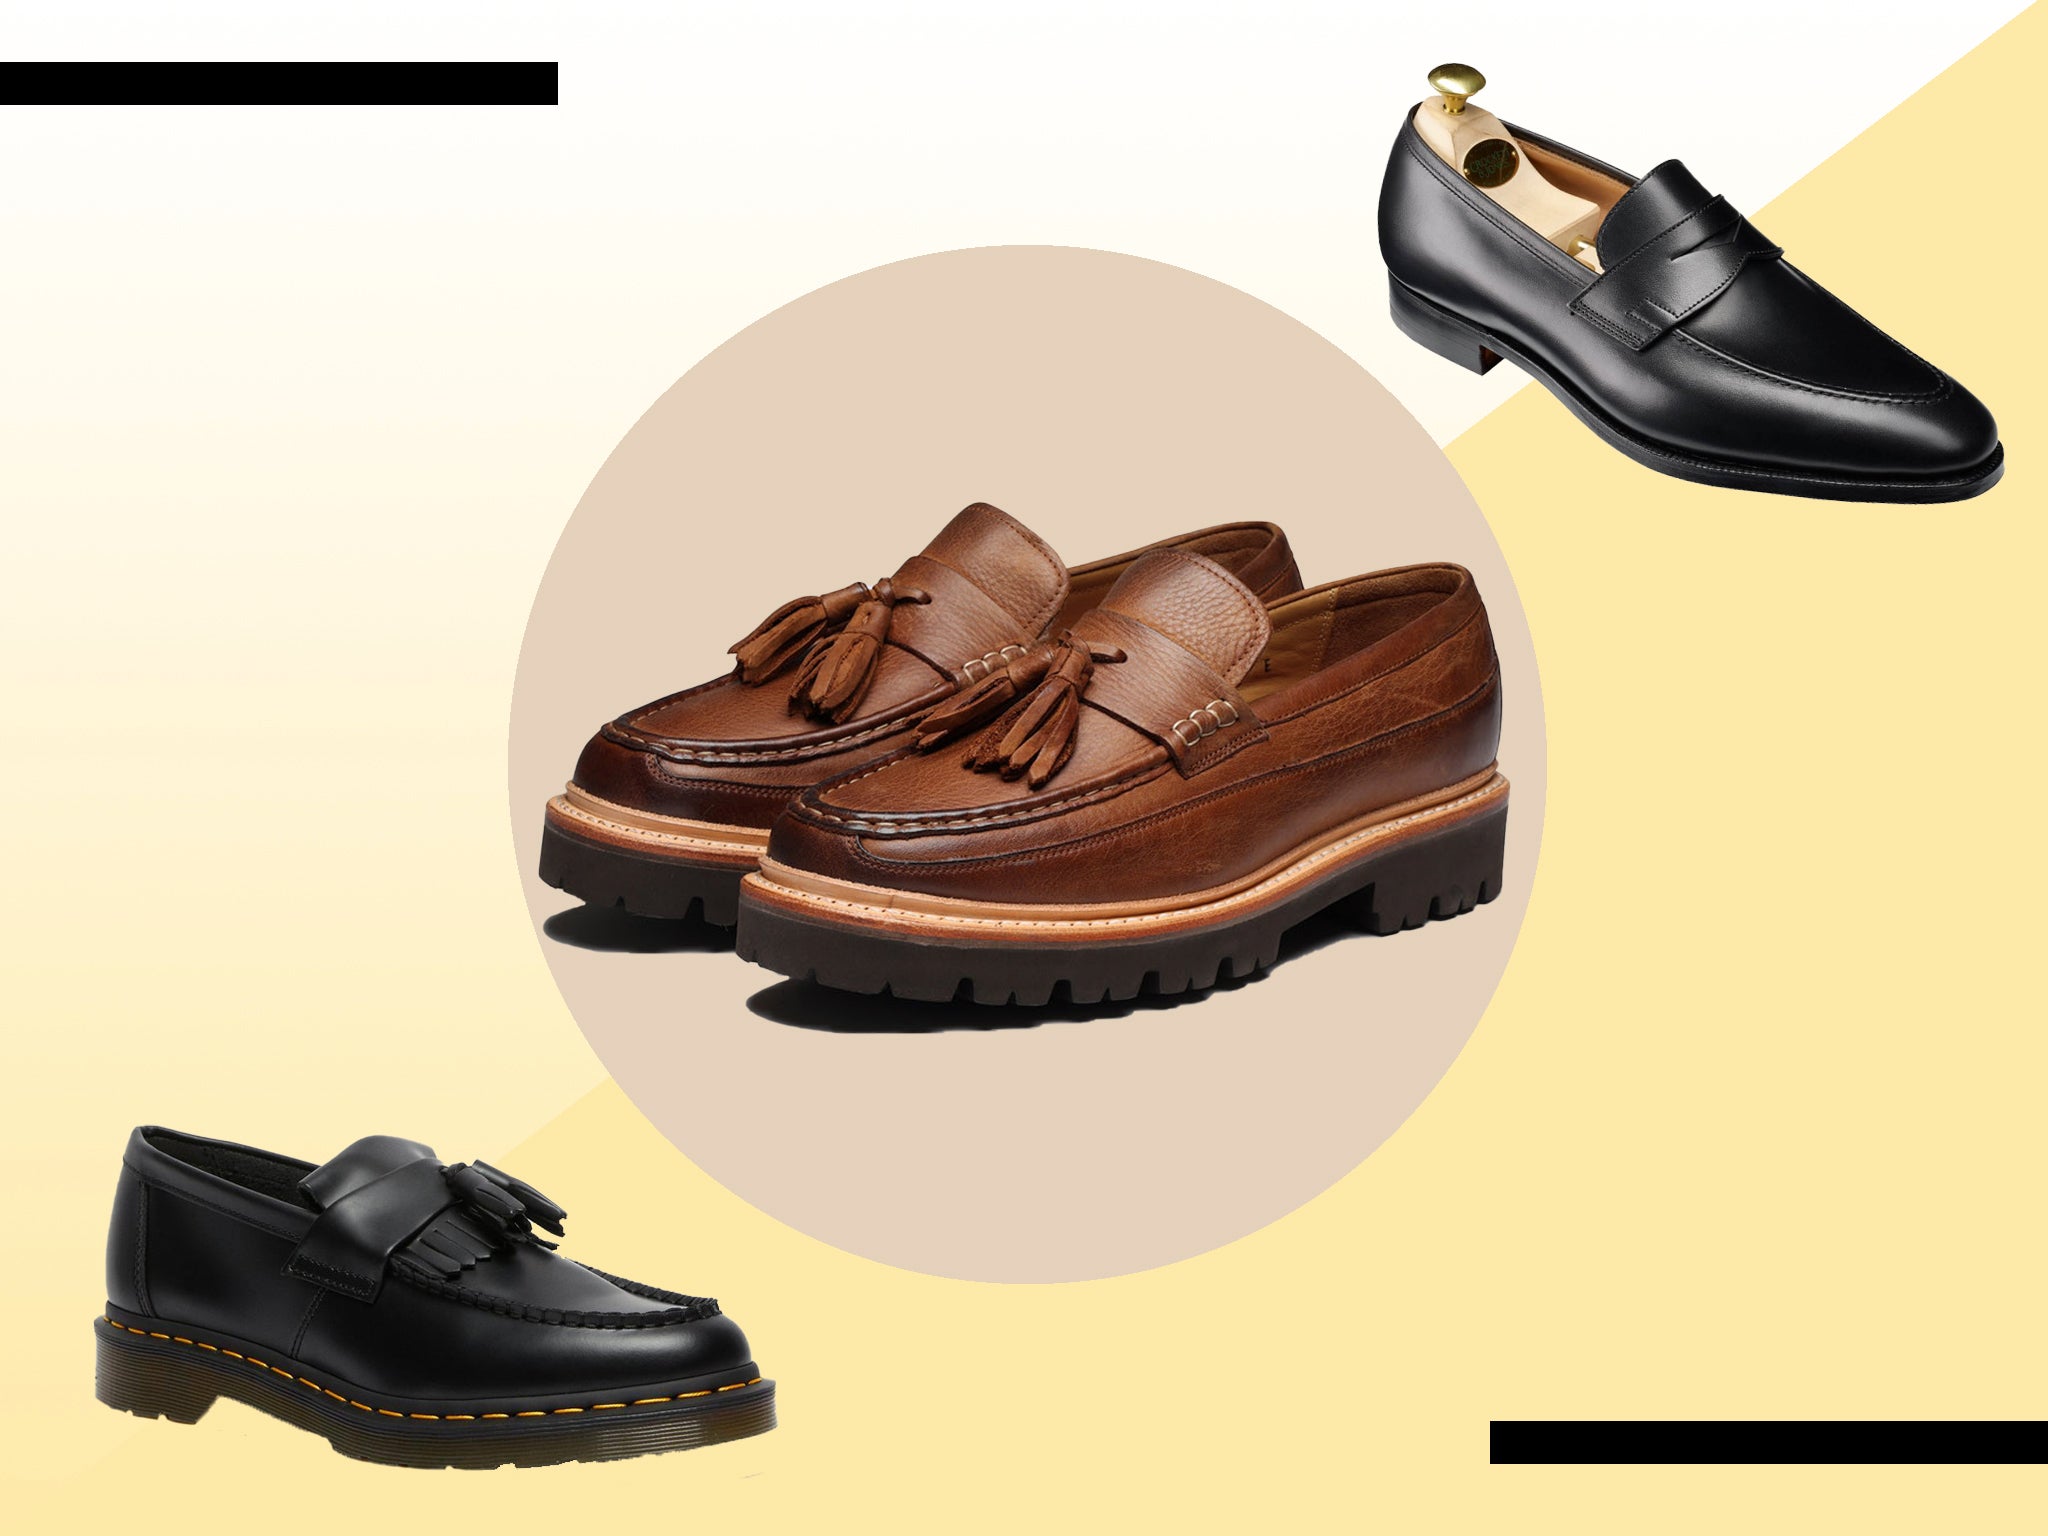 From suede to leather, these loafers are built to last